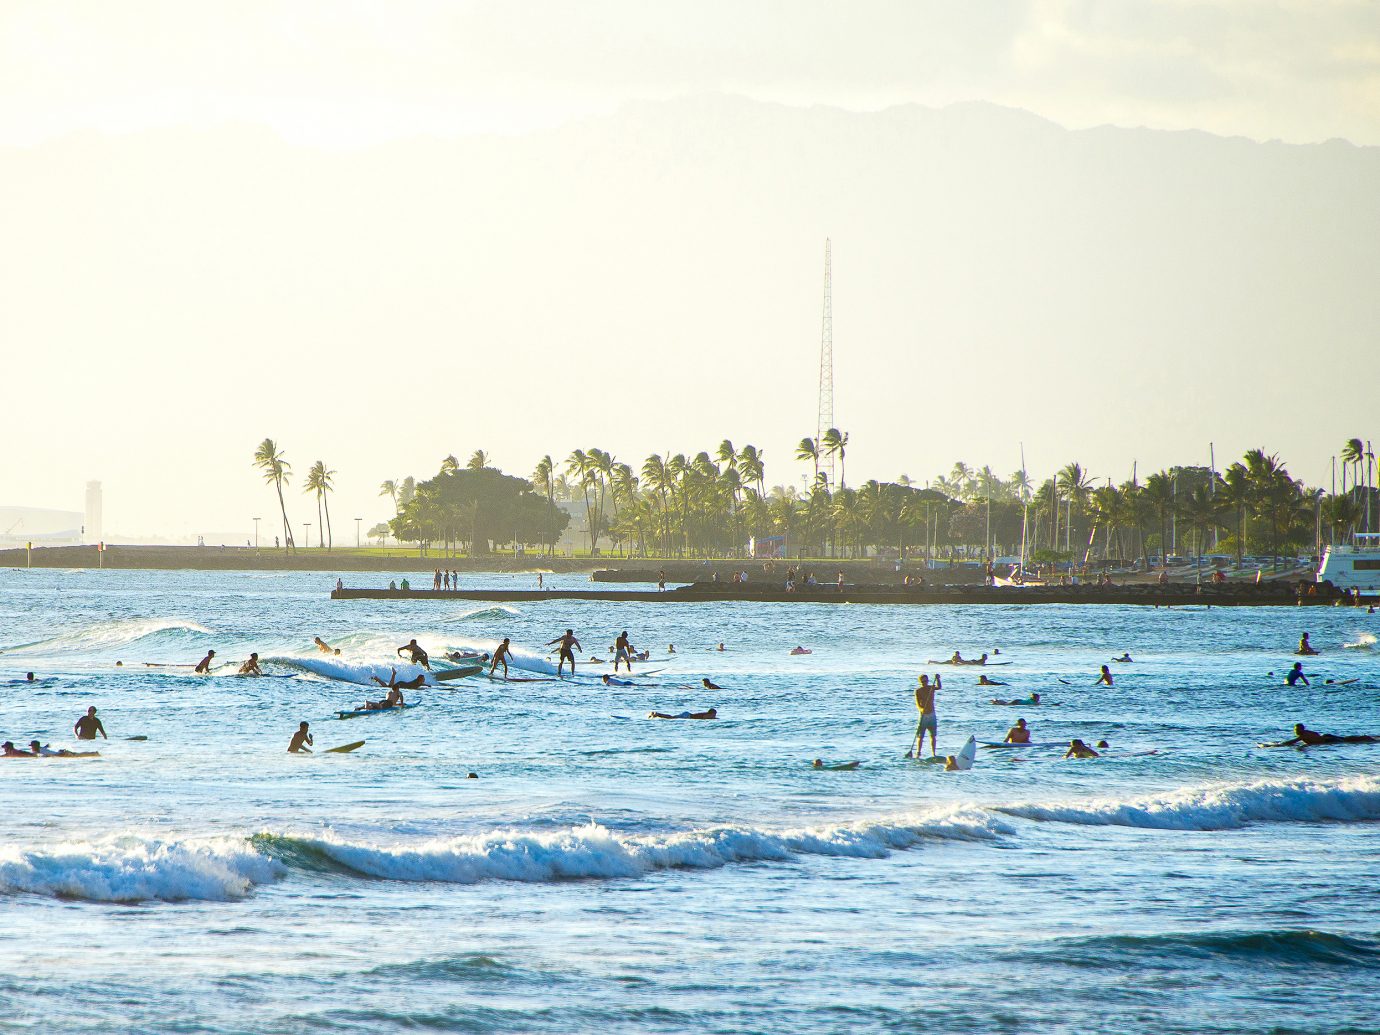 Many people surfing on surfboards and near Hawaii